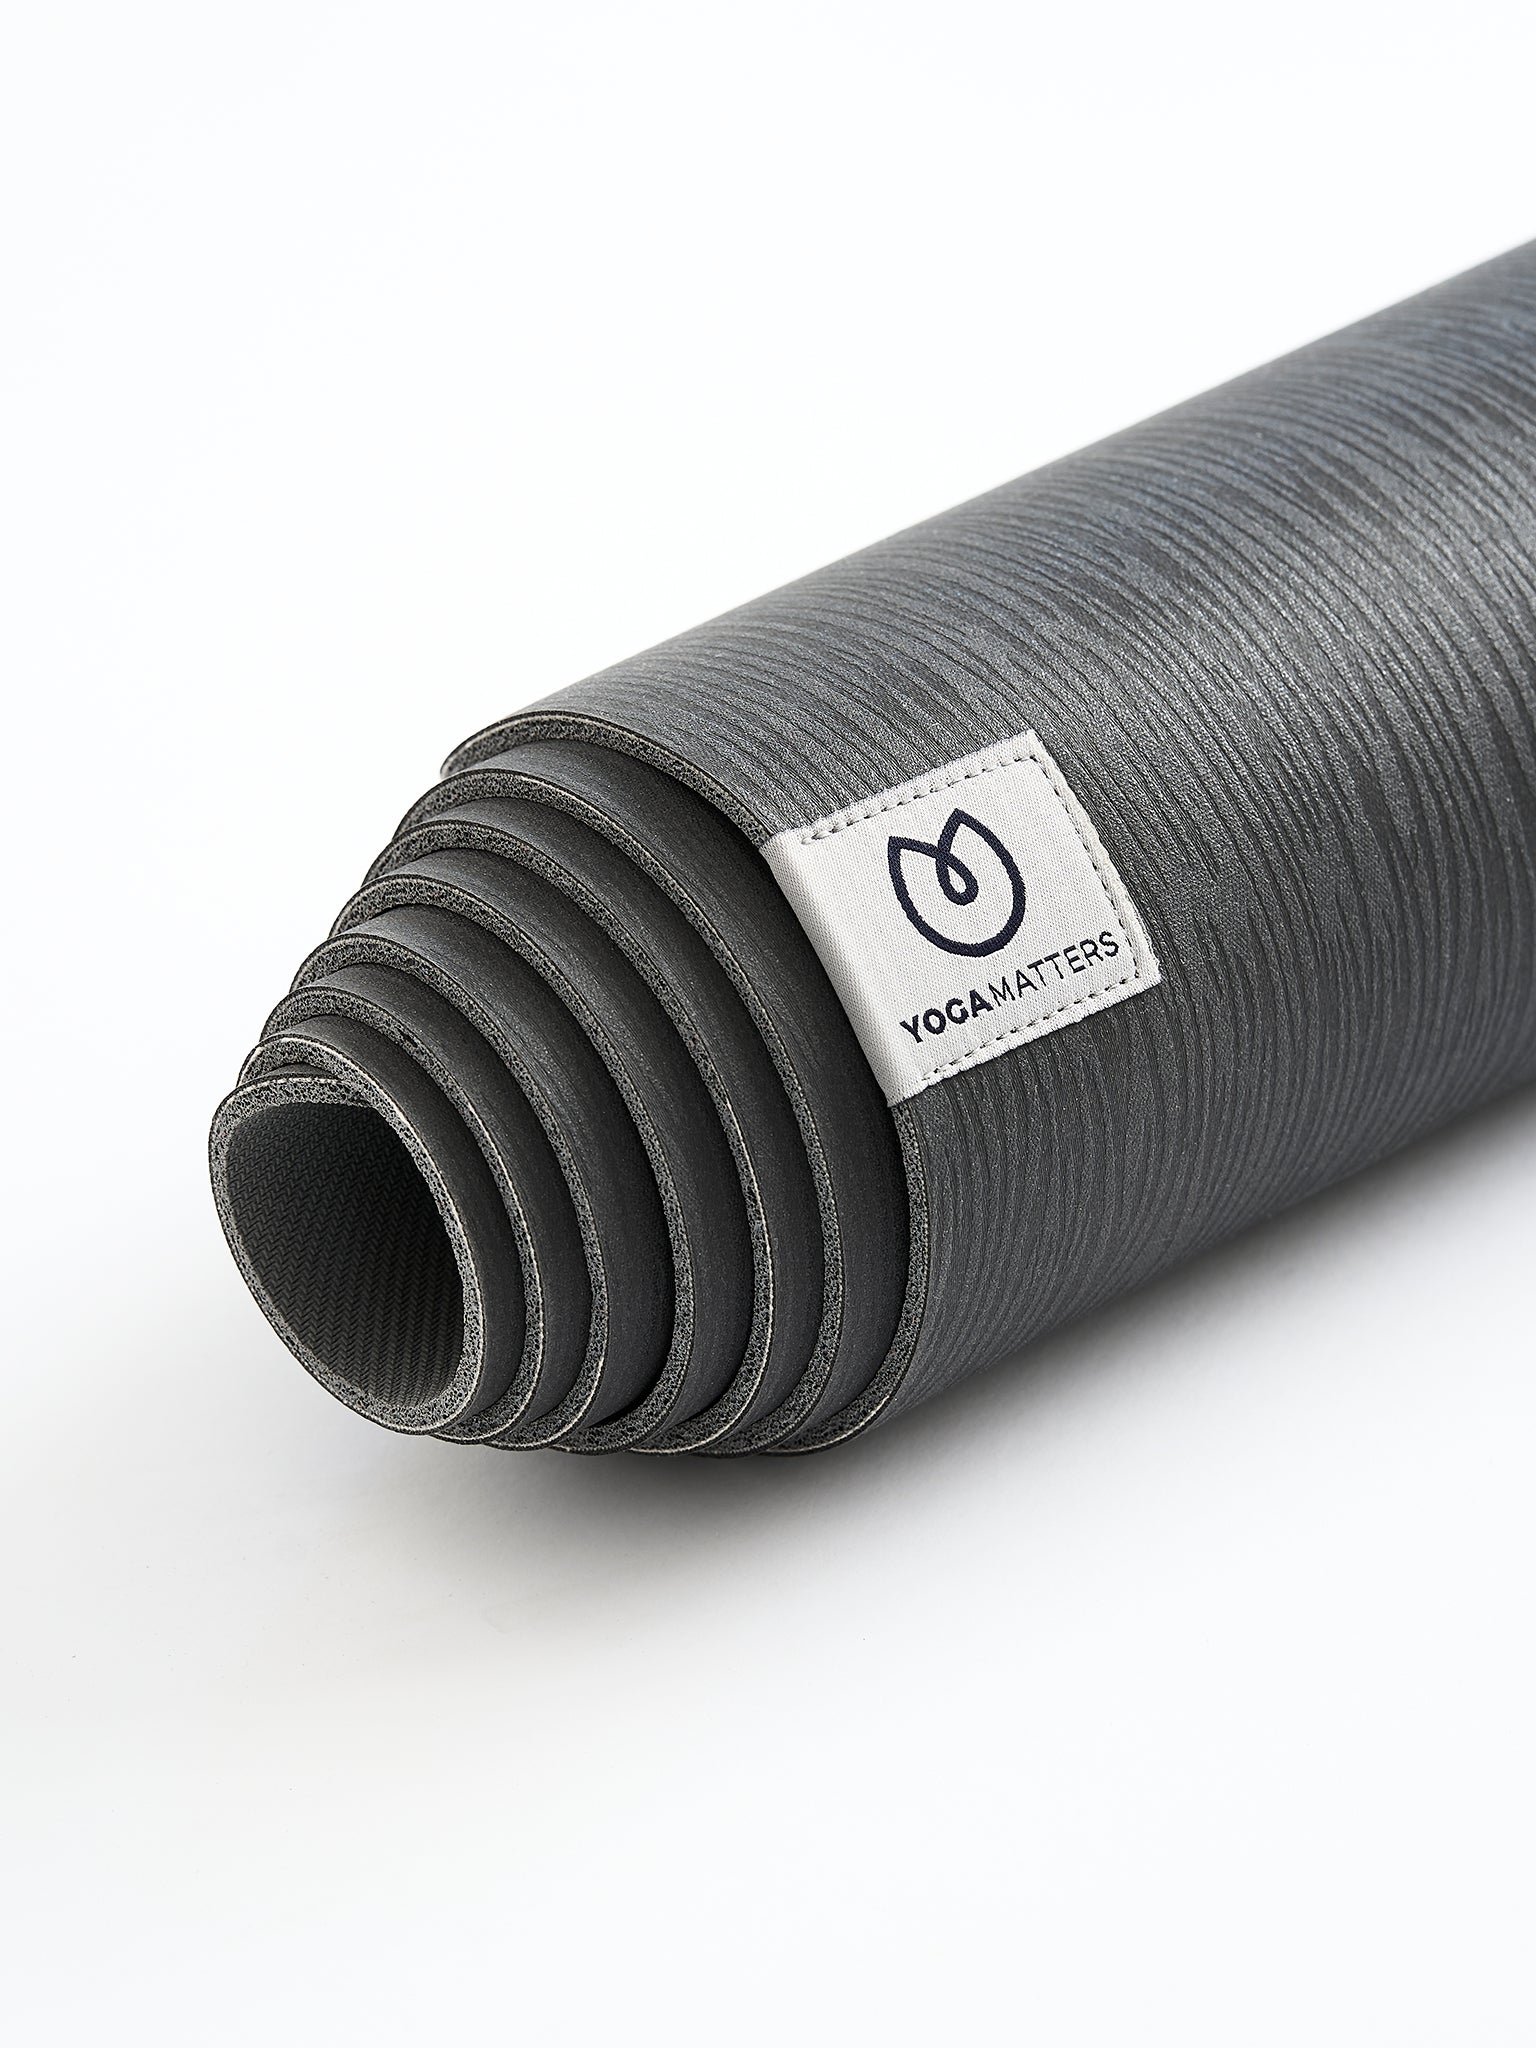 YogaMatters grey rolled-up yoga mat with textured surface, side view on white background